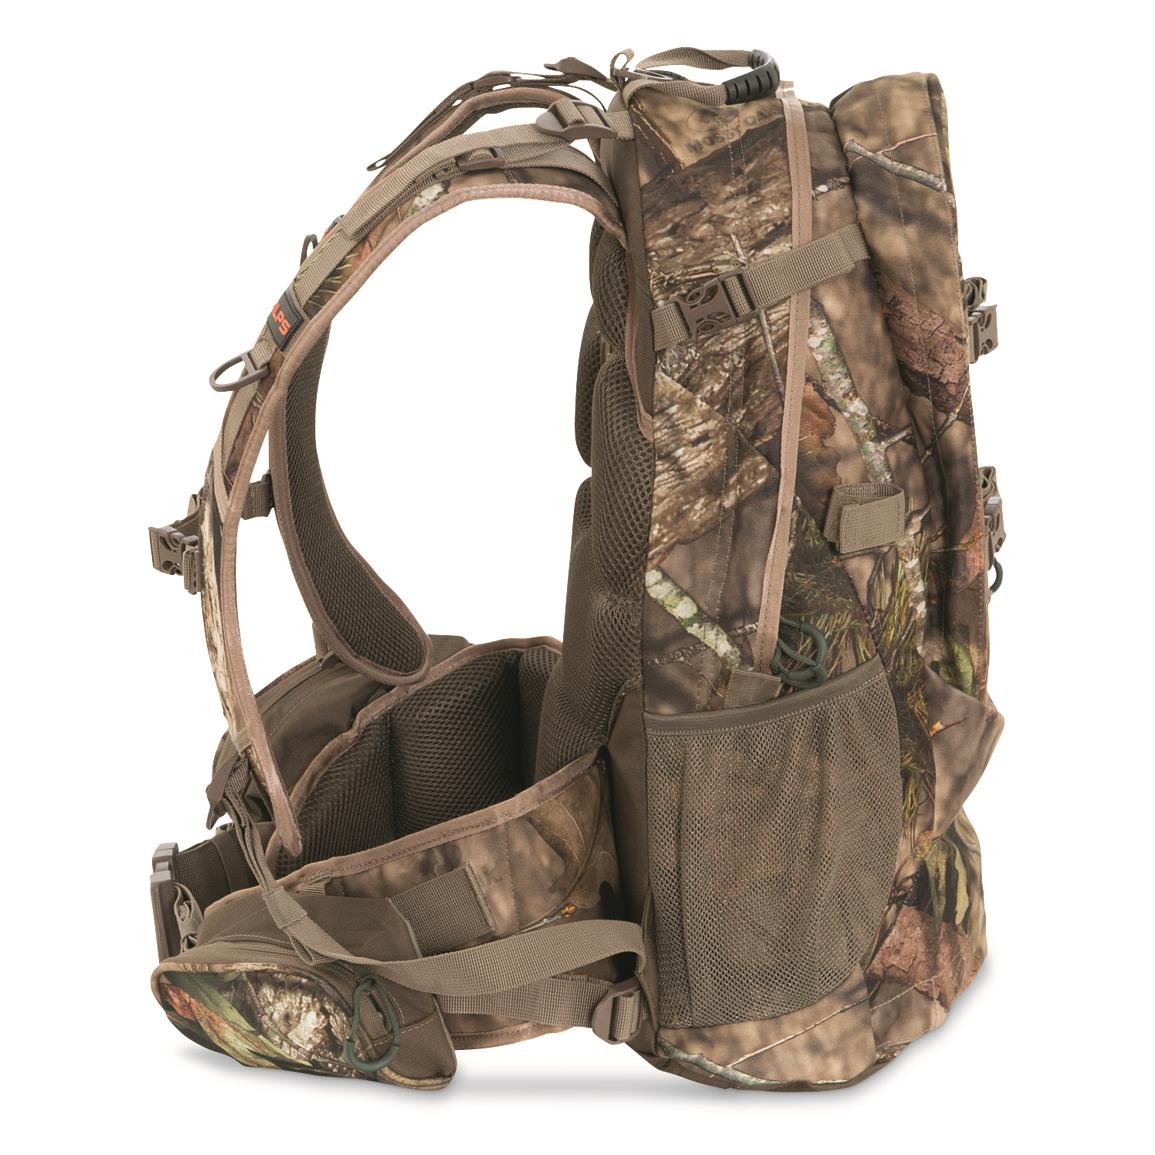 Best Small Hunting Backpack | Literacy Basics